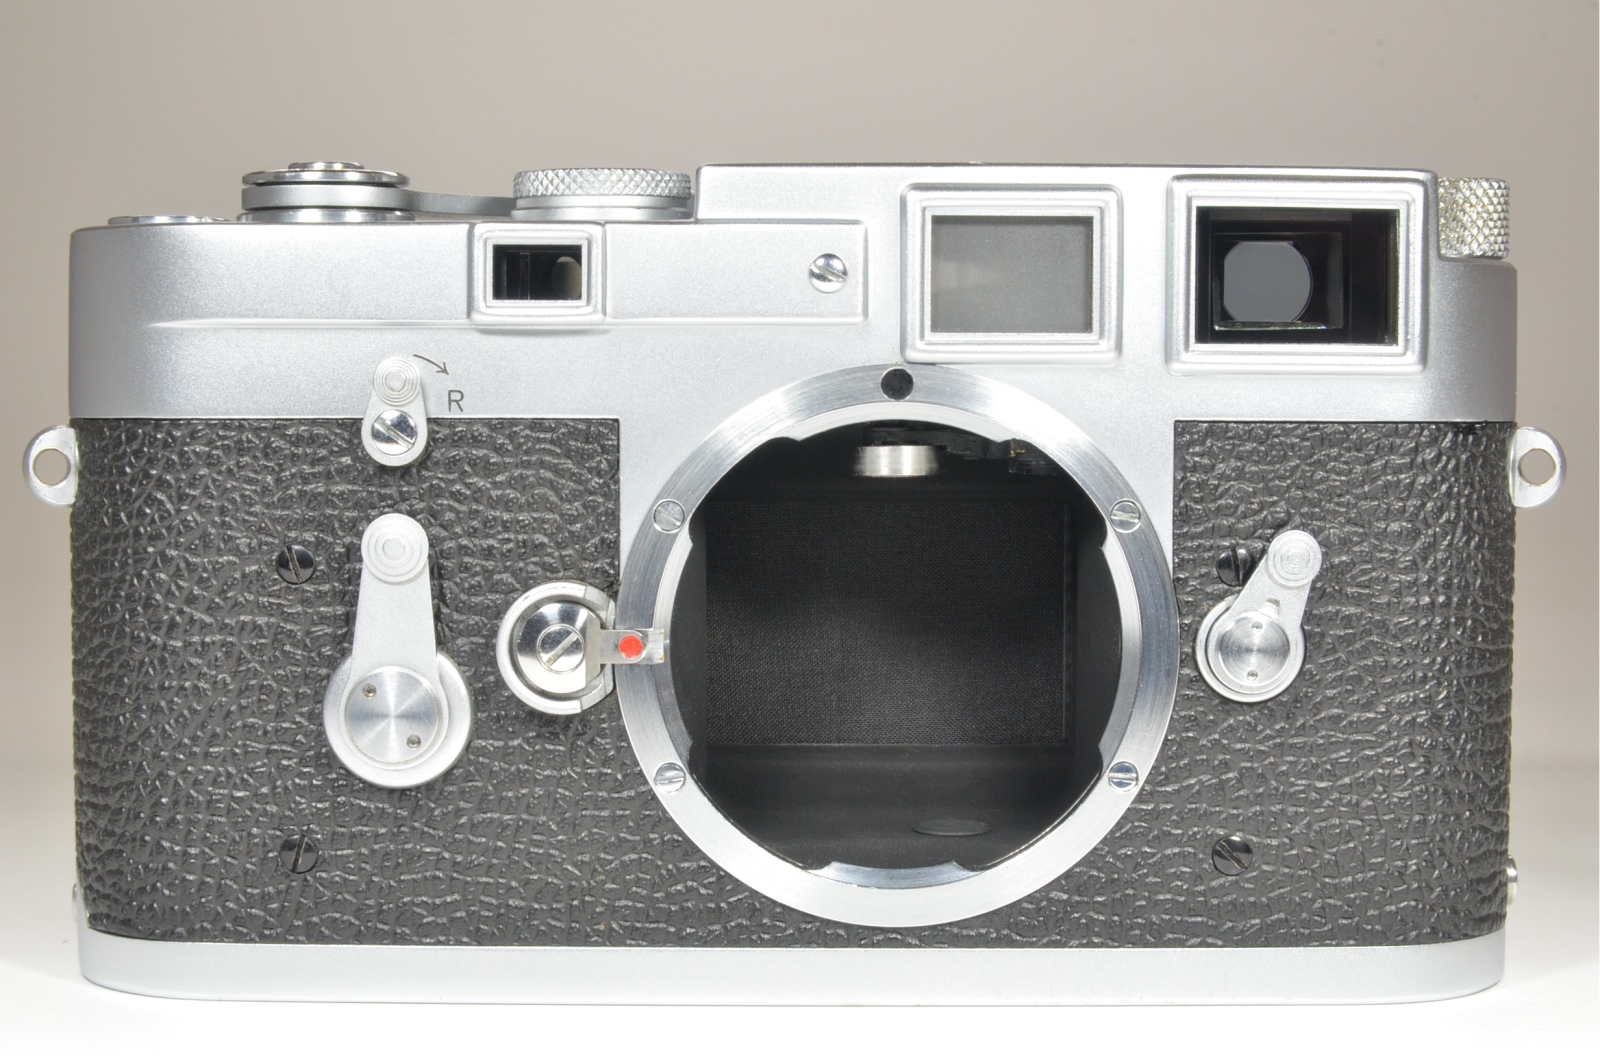 leica m3 single stroke s/n 986046 year 1959 with half leather case and strap